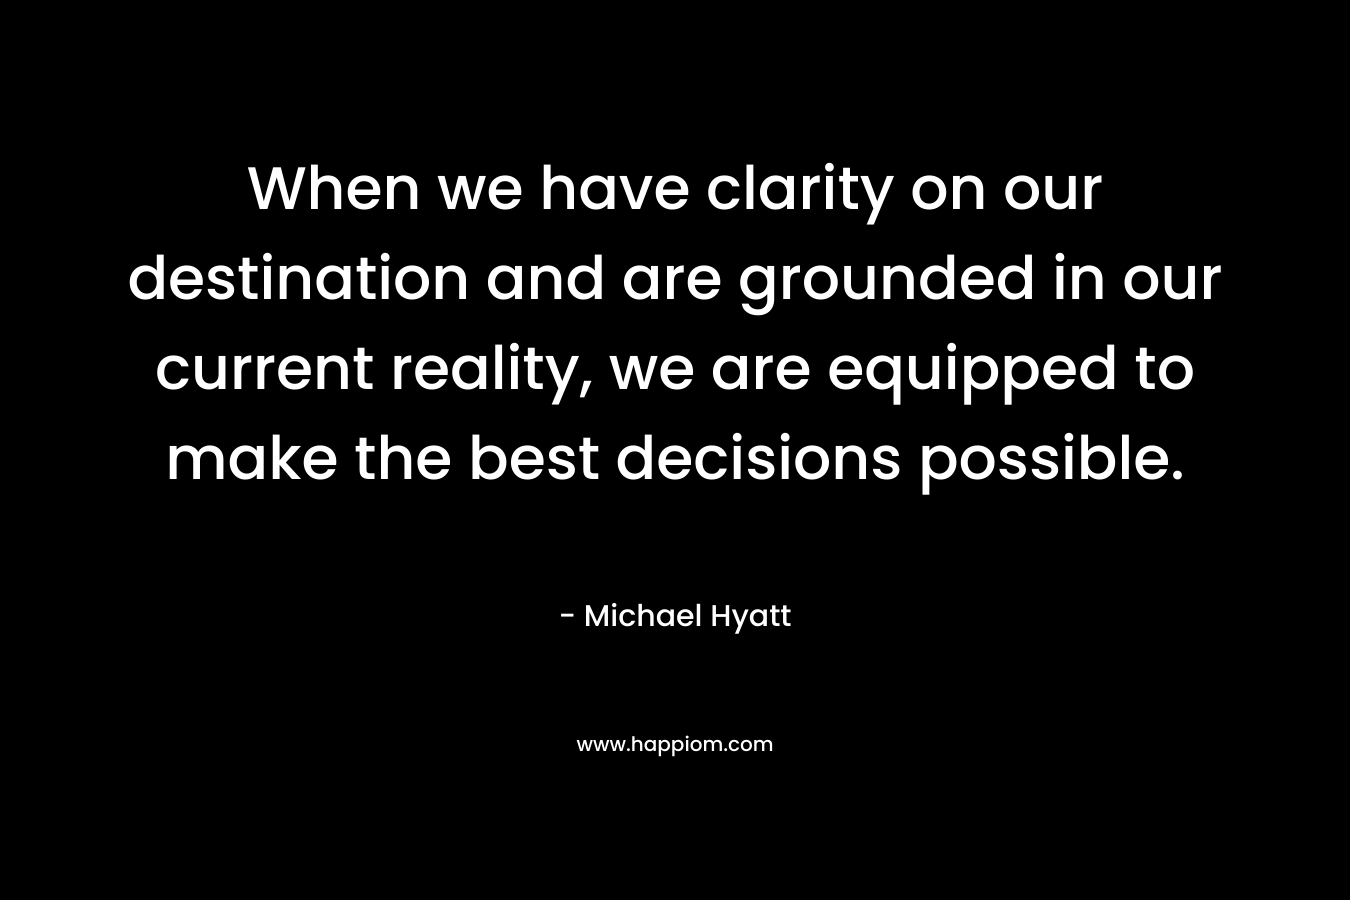 When we have clarity on our destination and are grounded in our current reality, we are equipped to make the best decisions possible.